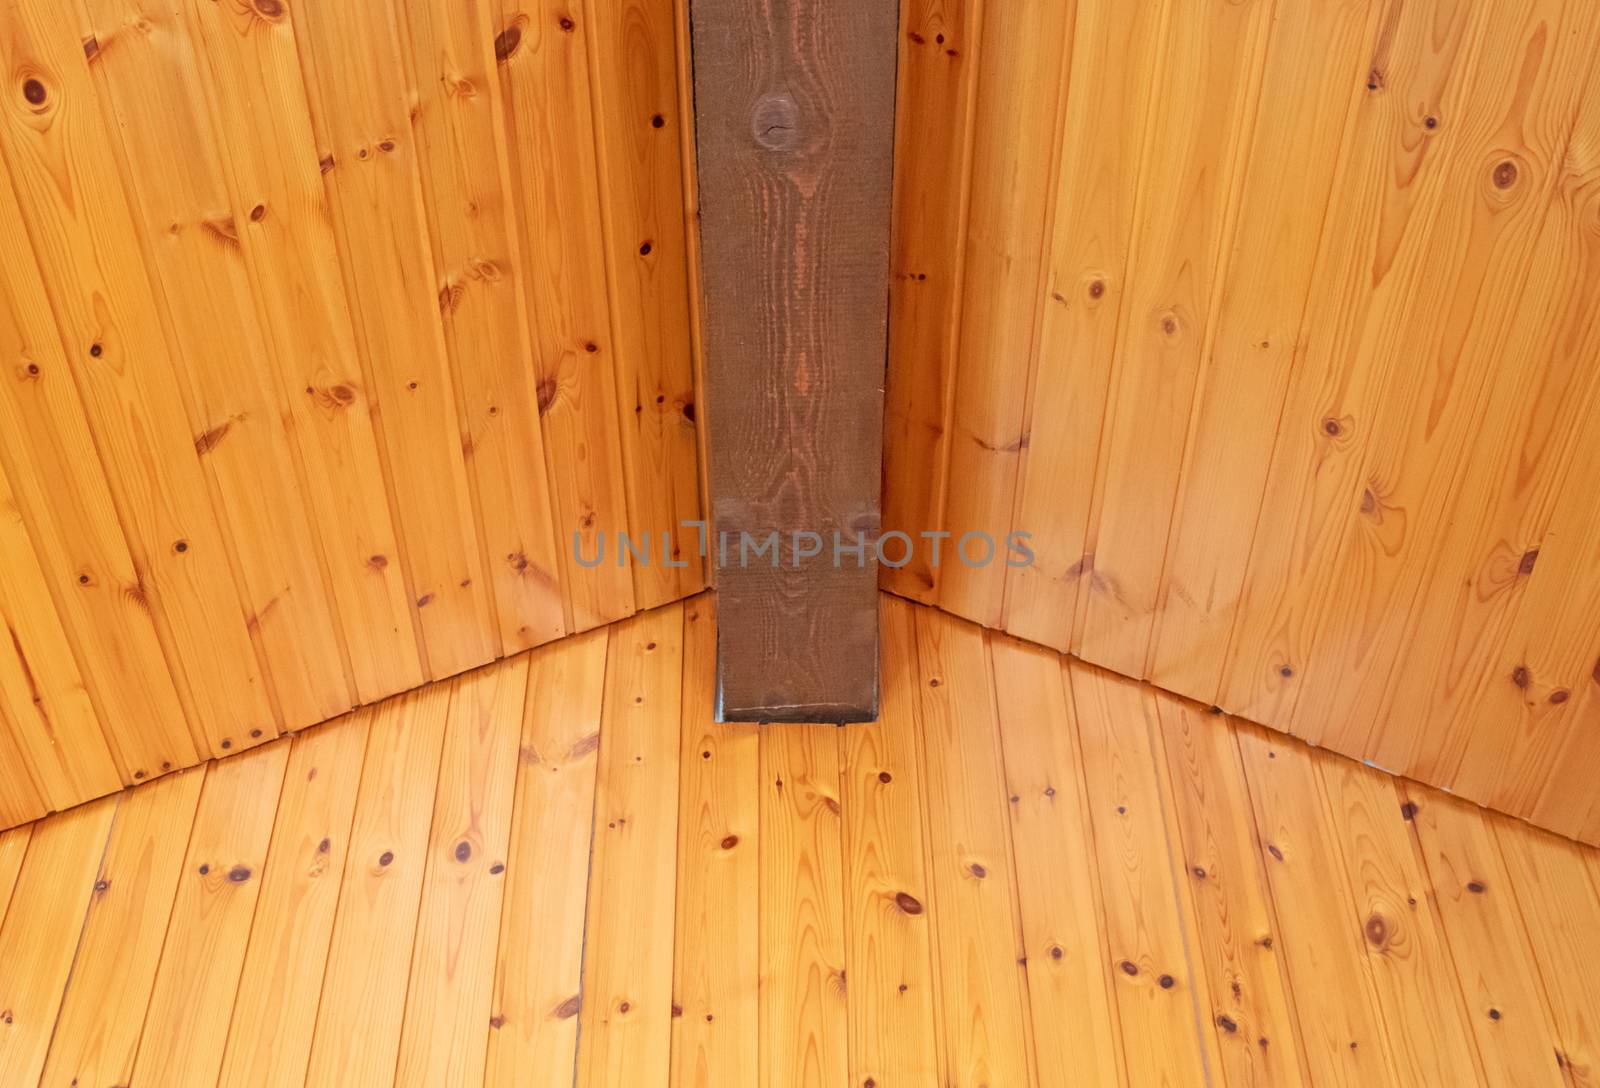 Rustic house ceiling with wide wooden beam support by michaklootwijk